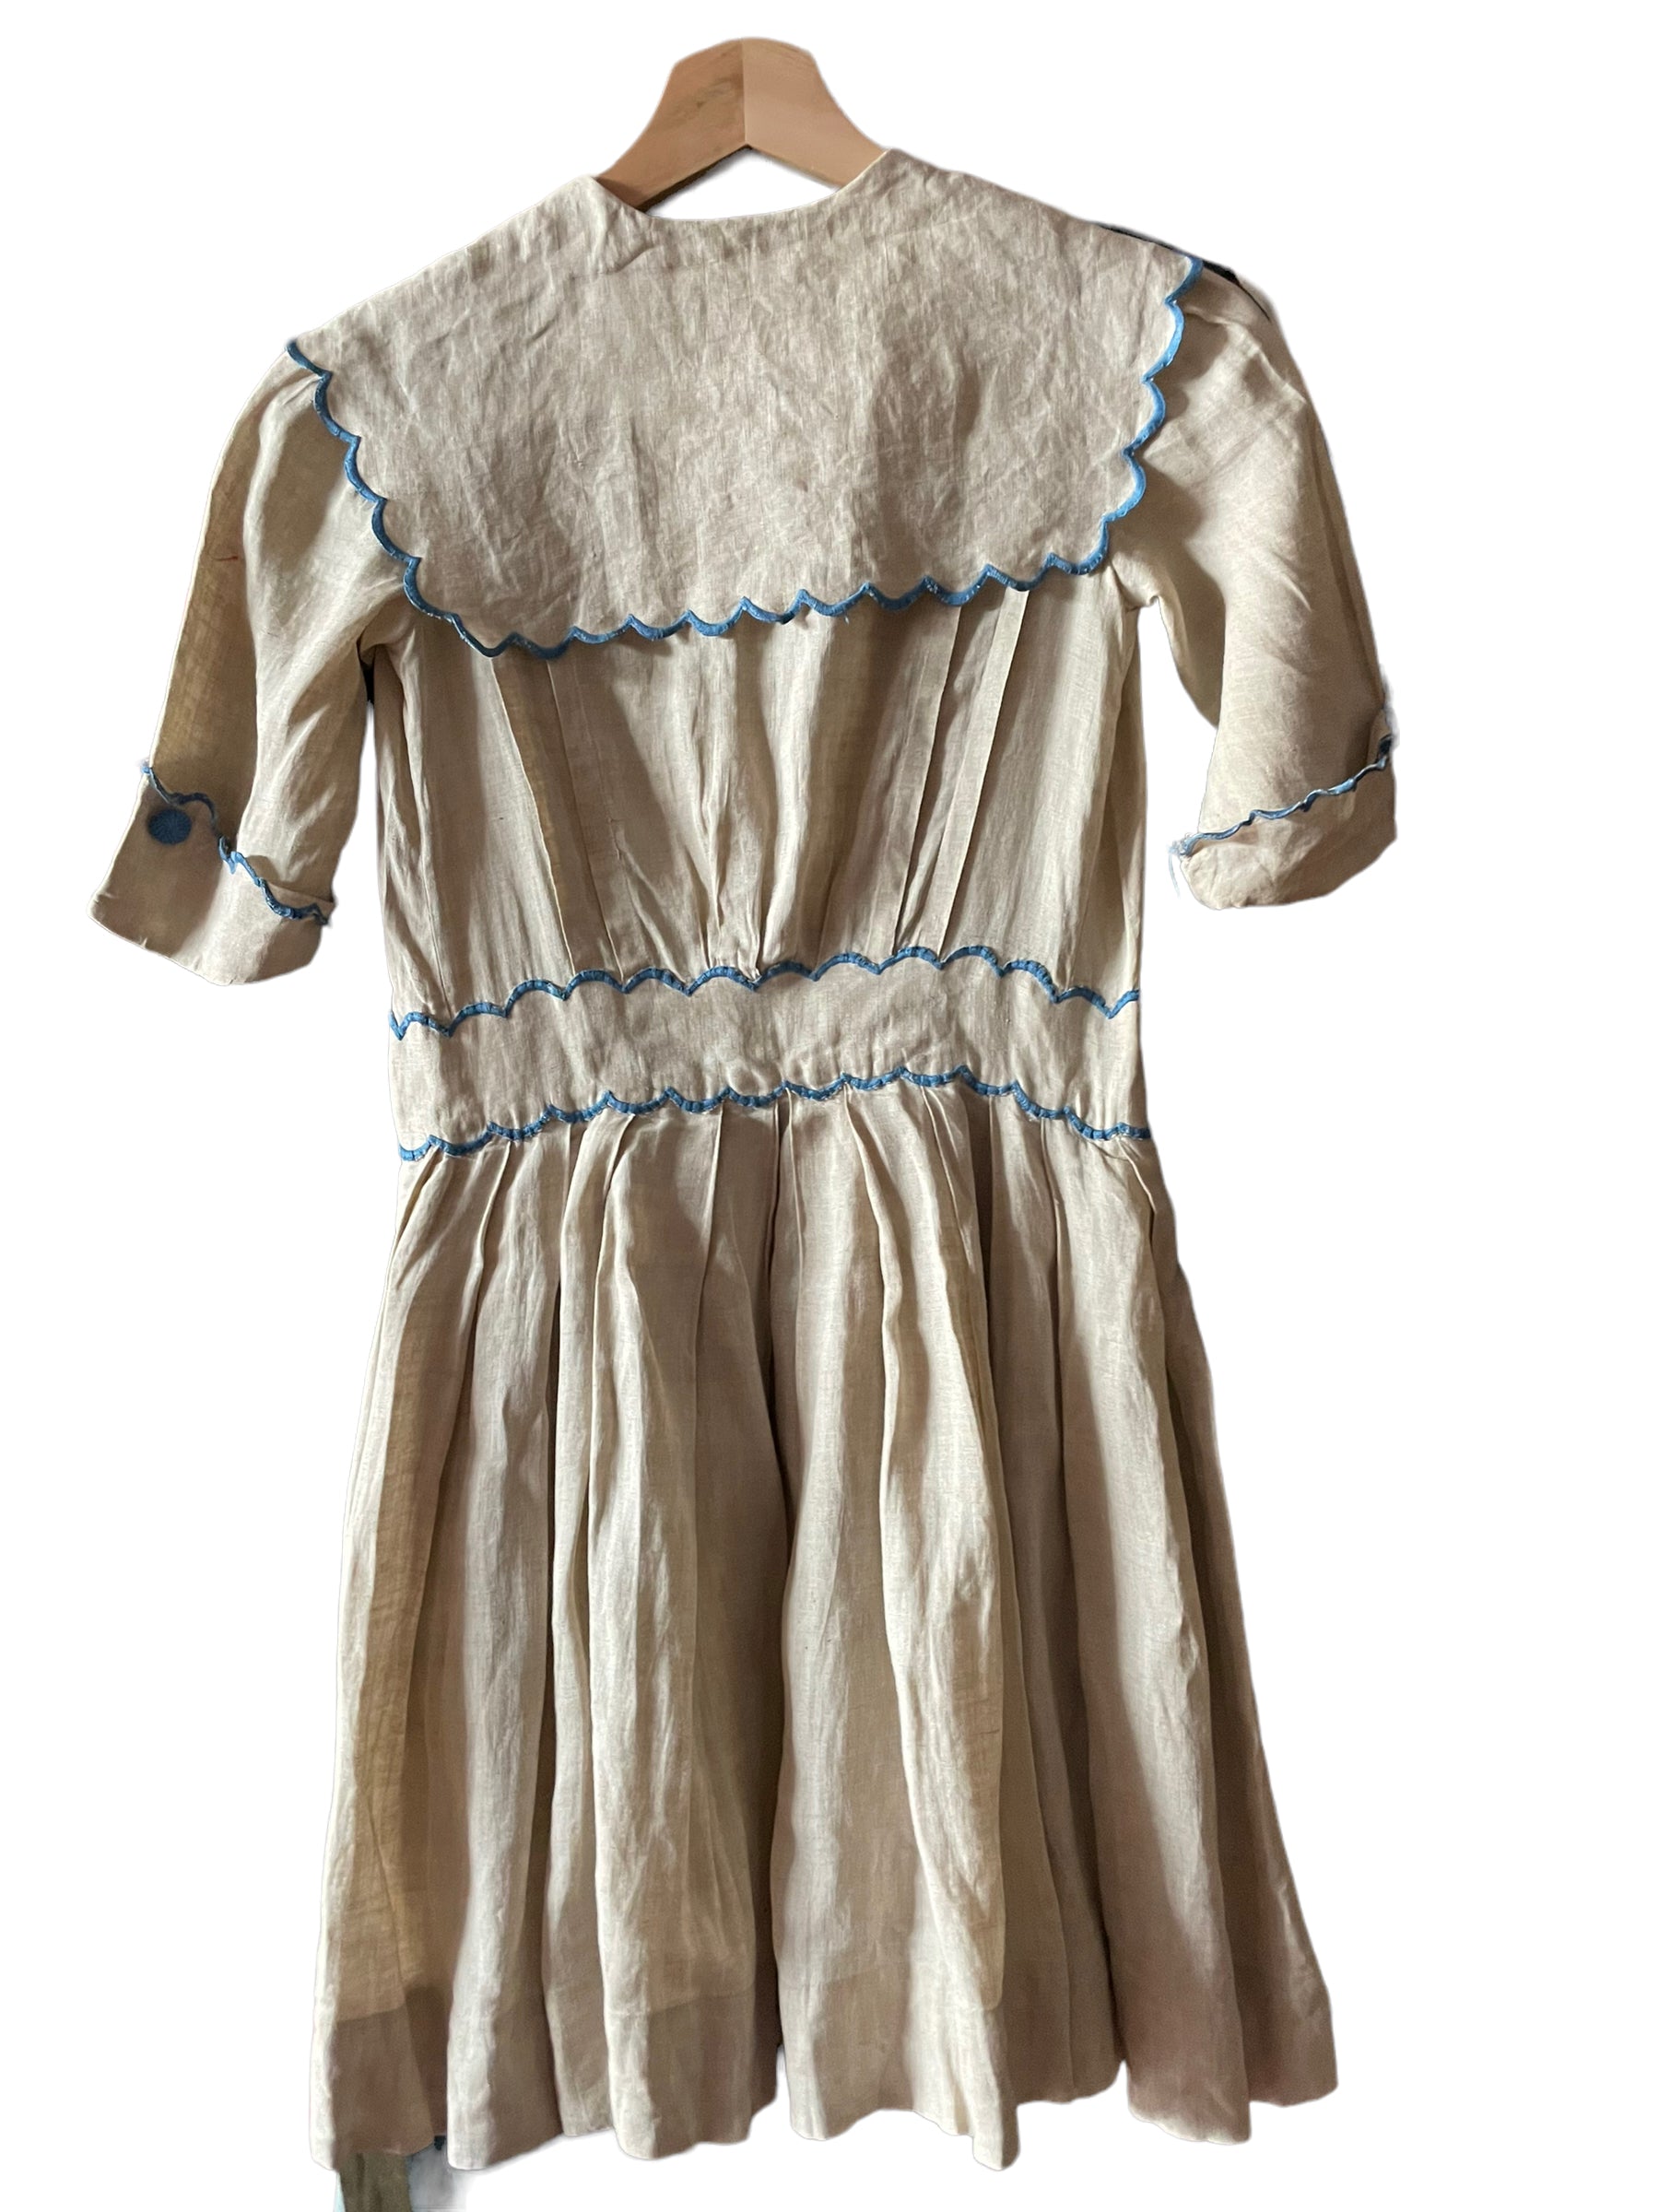 Full back view of Antique Early 1900s Linen Dress SZ XS